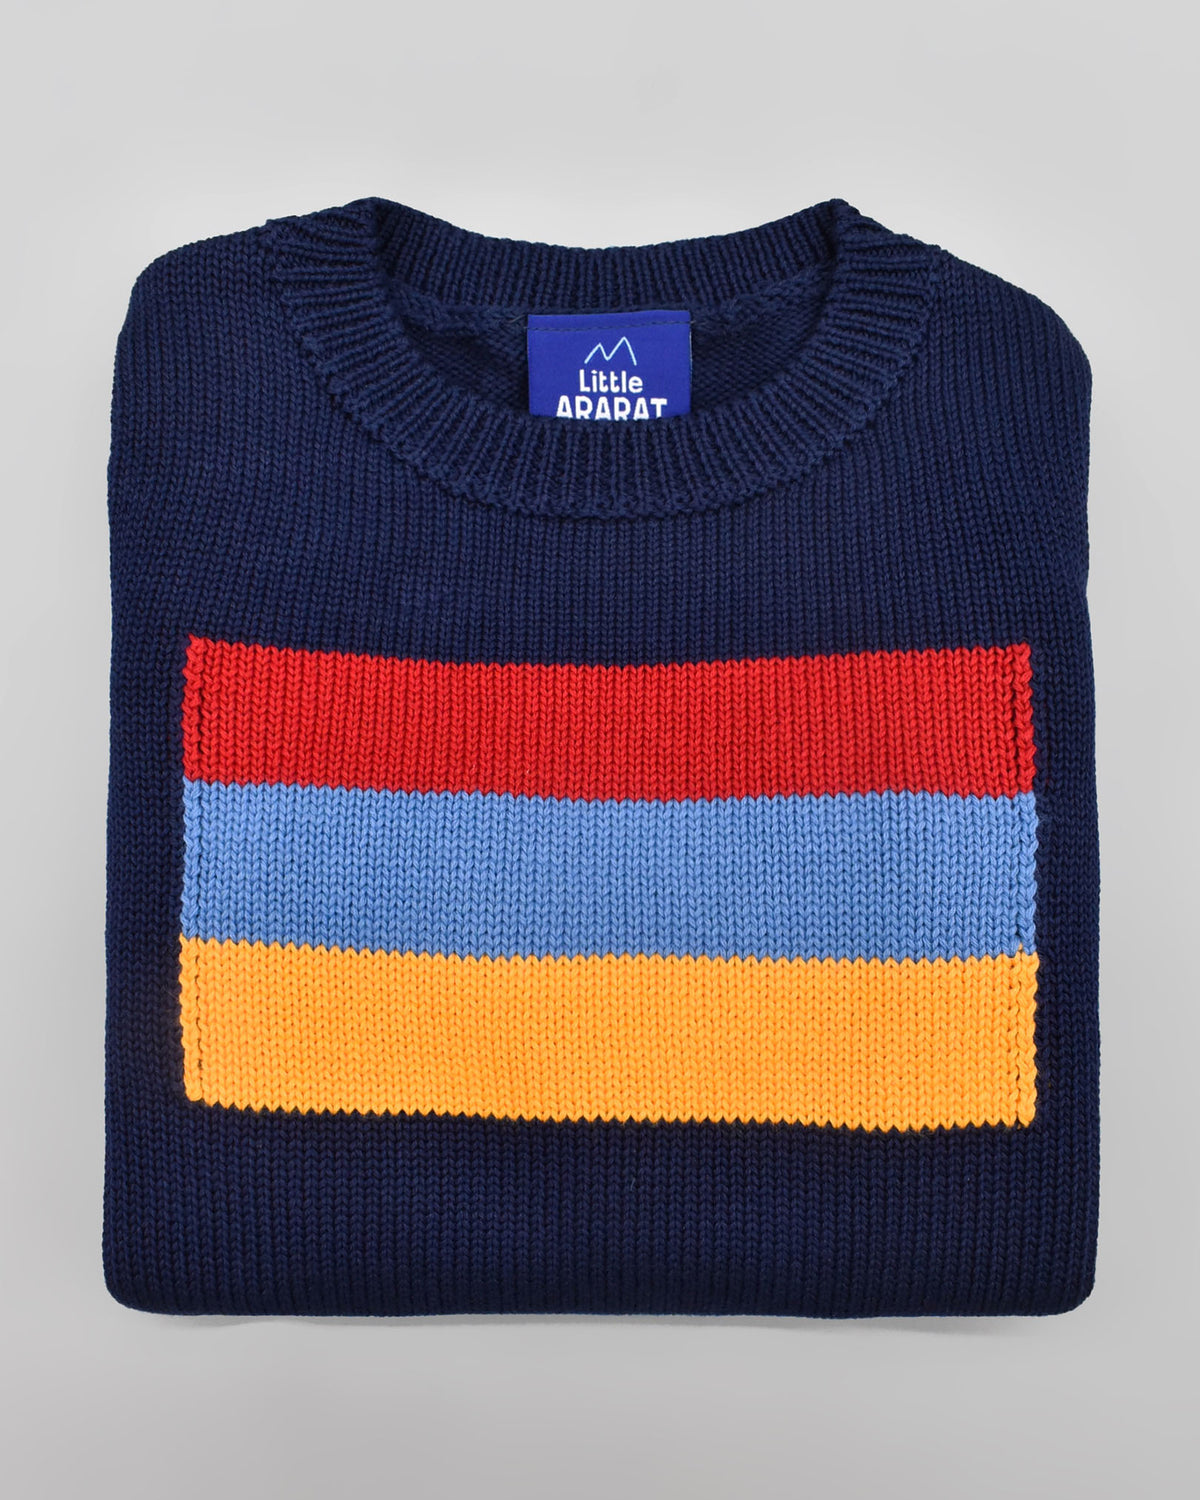 Toddler Knitted Armenia Heritage Flag Sweater (Navy)